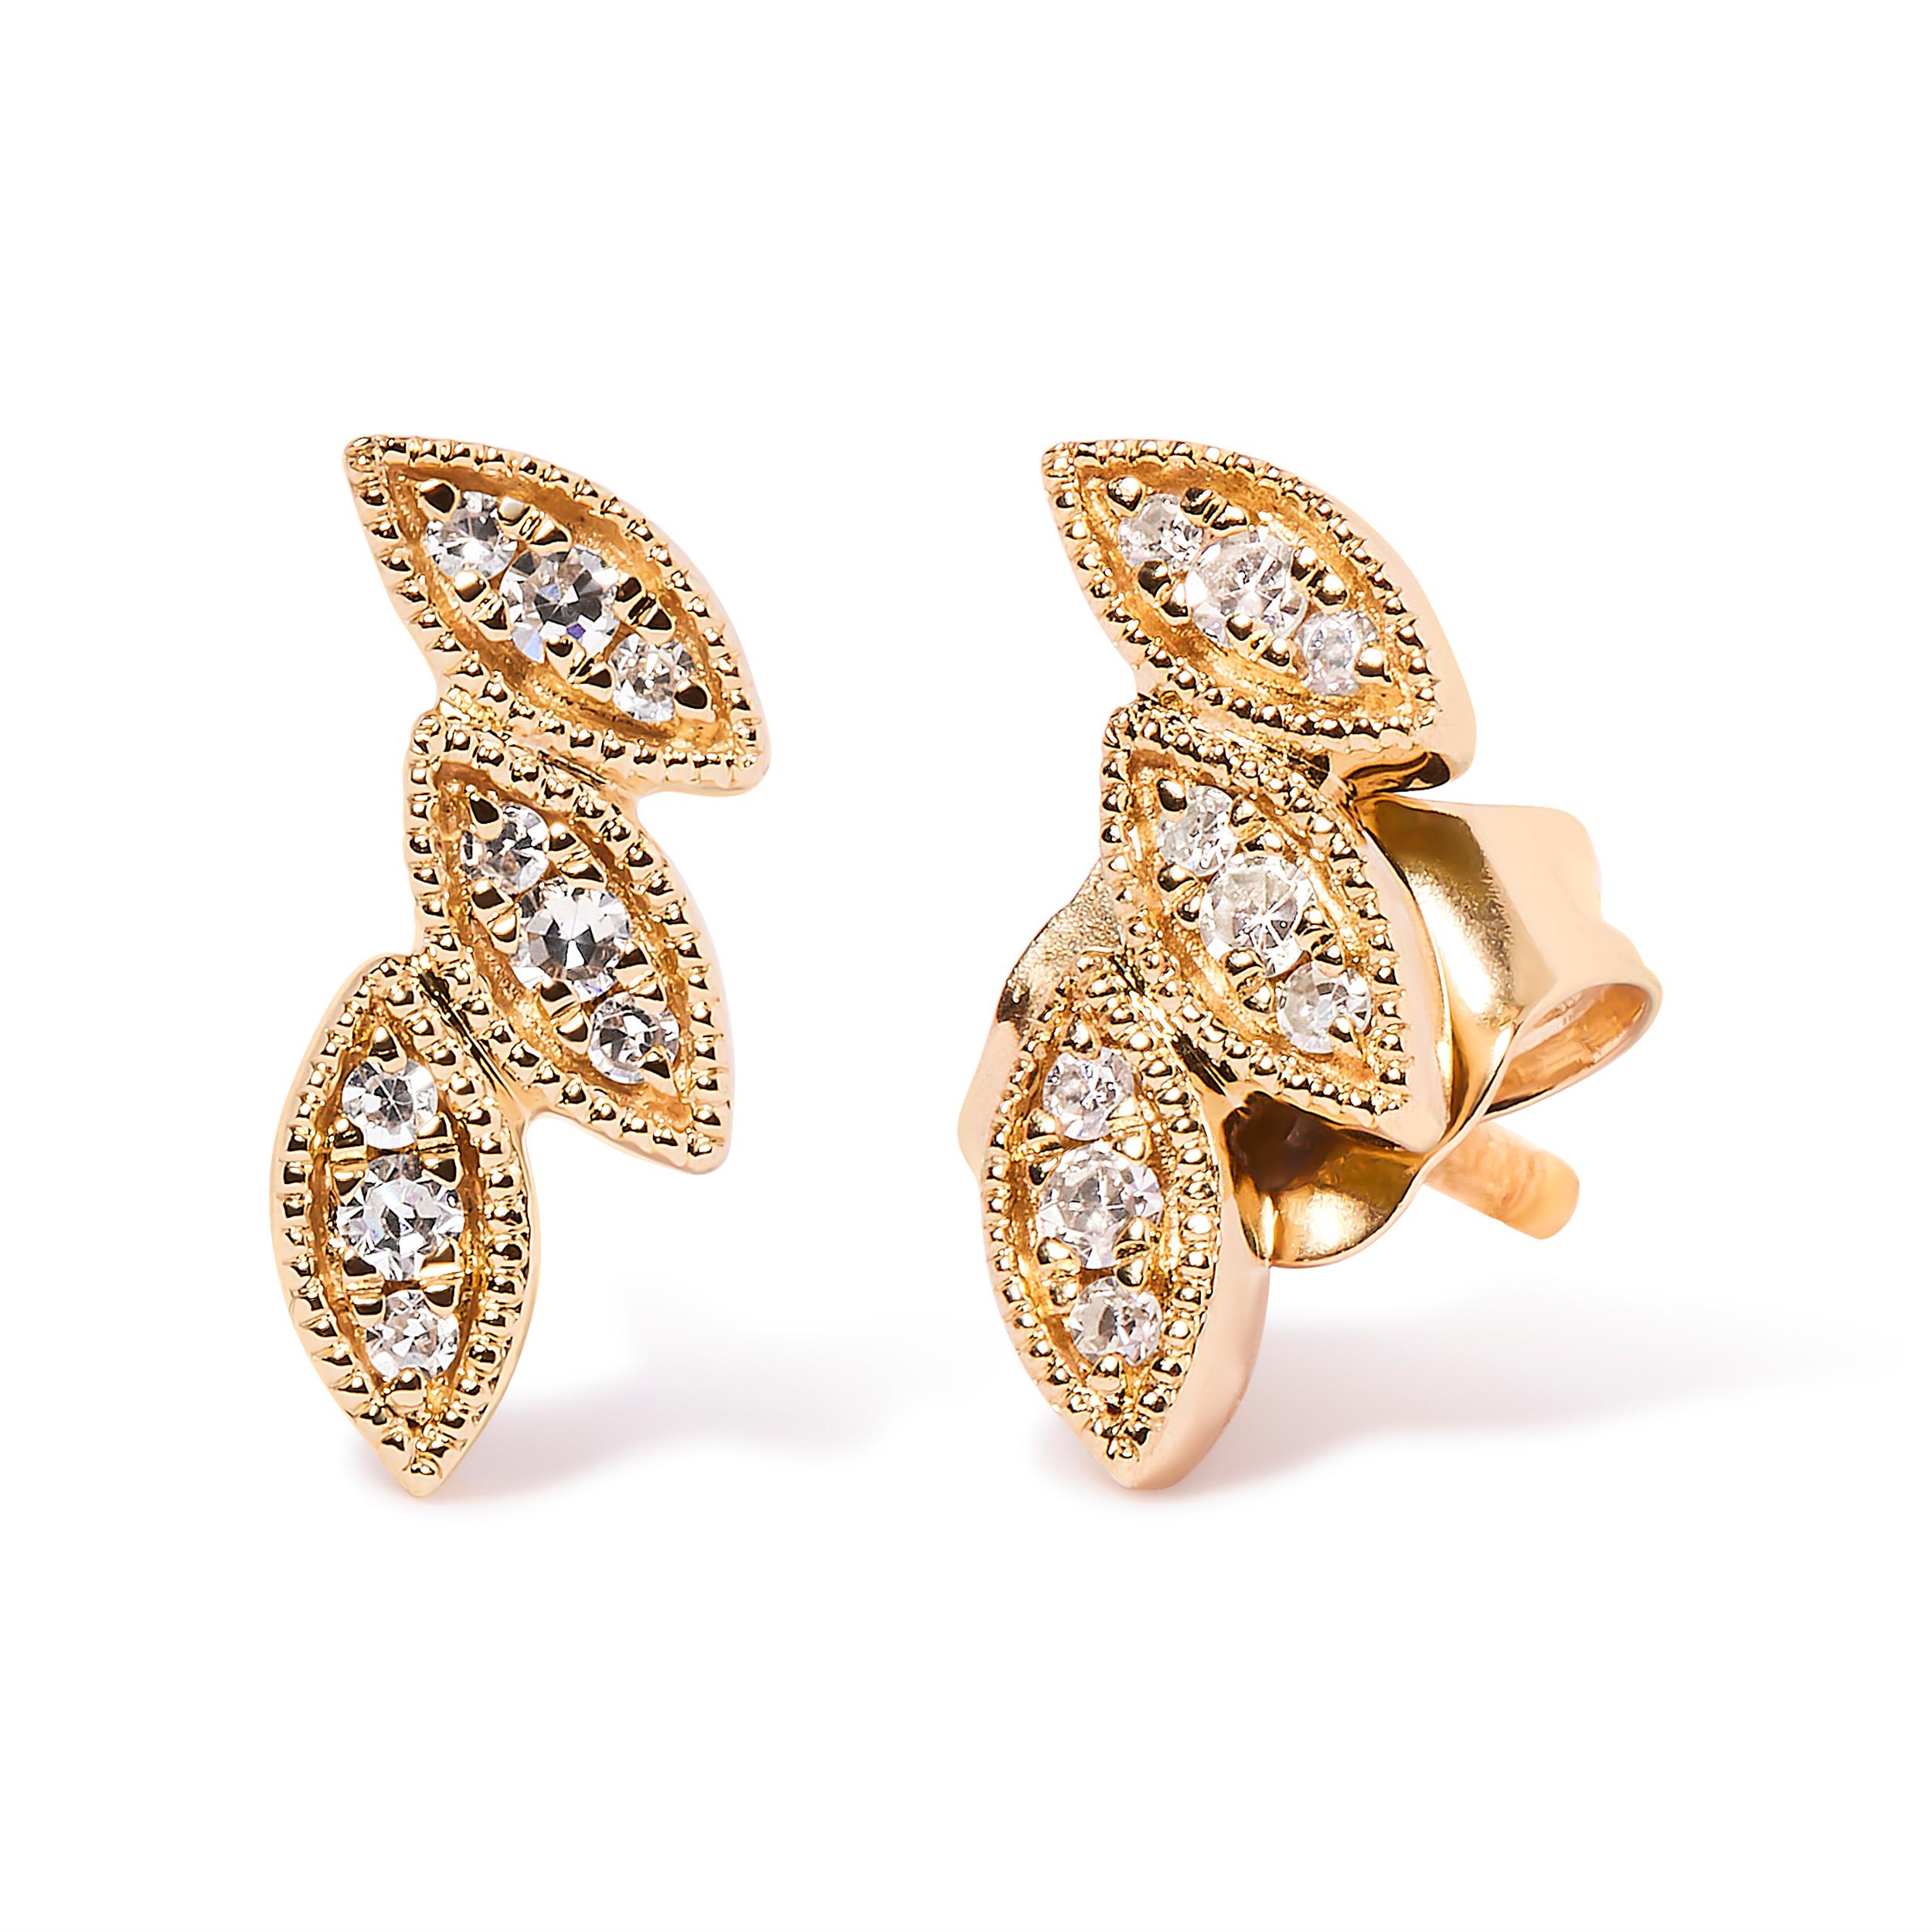 Introducing a breathtaking masterpiece that will captivate every eye it graces. Crafted with utmost precision, these 10K Yellow Gold Stud Earrings feature a mesmerizing triple leaf design, symbolizing growth, prosperity, and the beauty of nature.